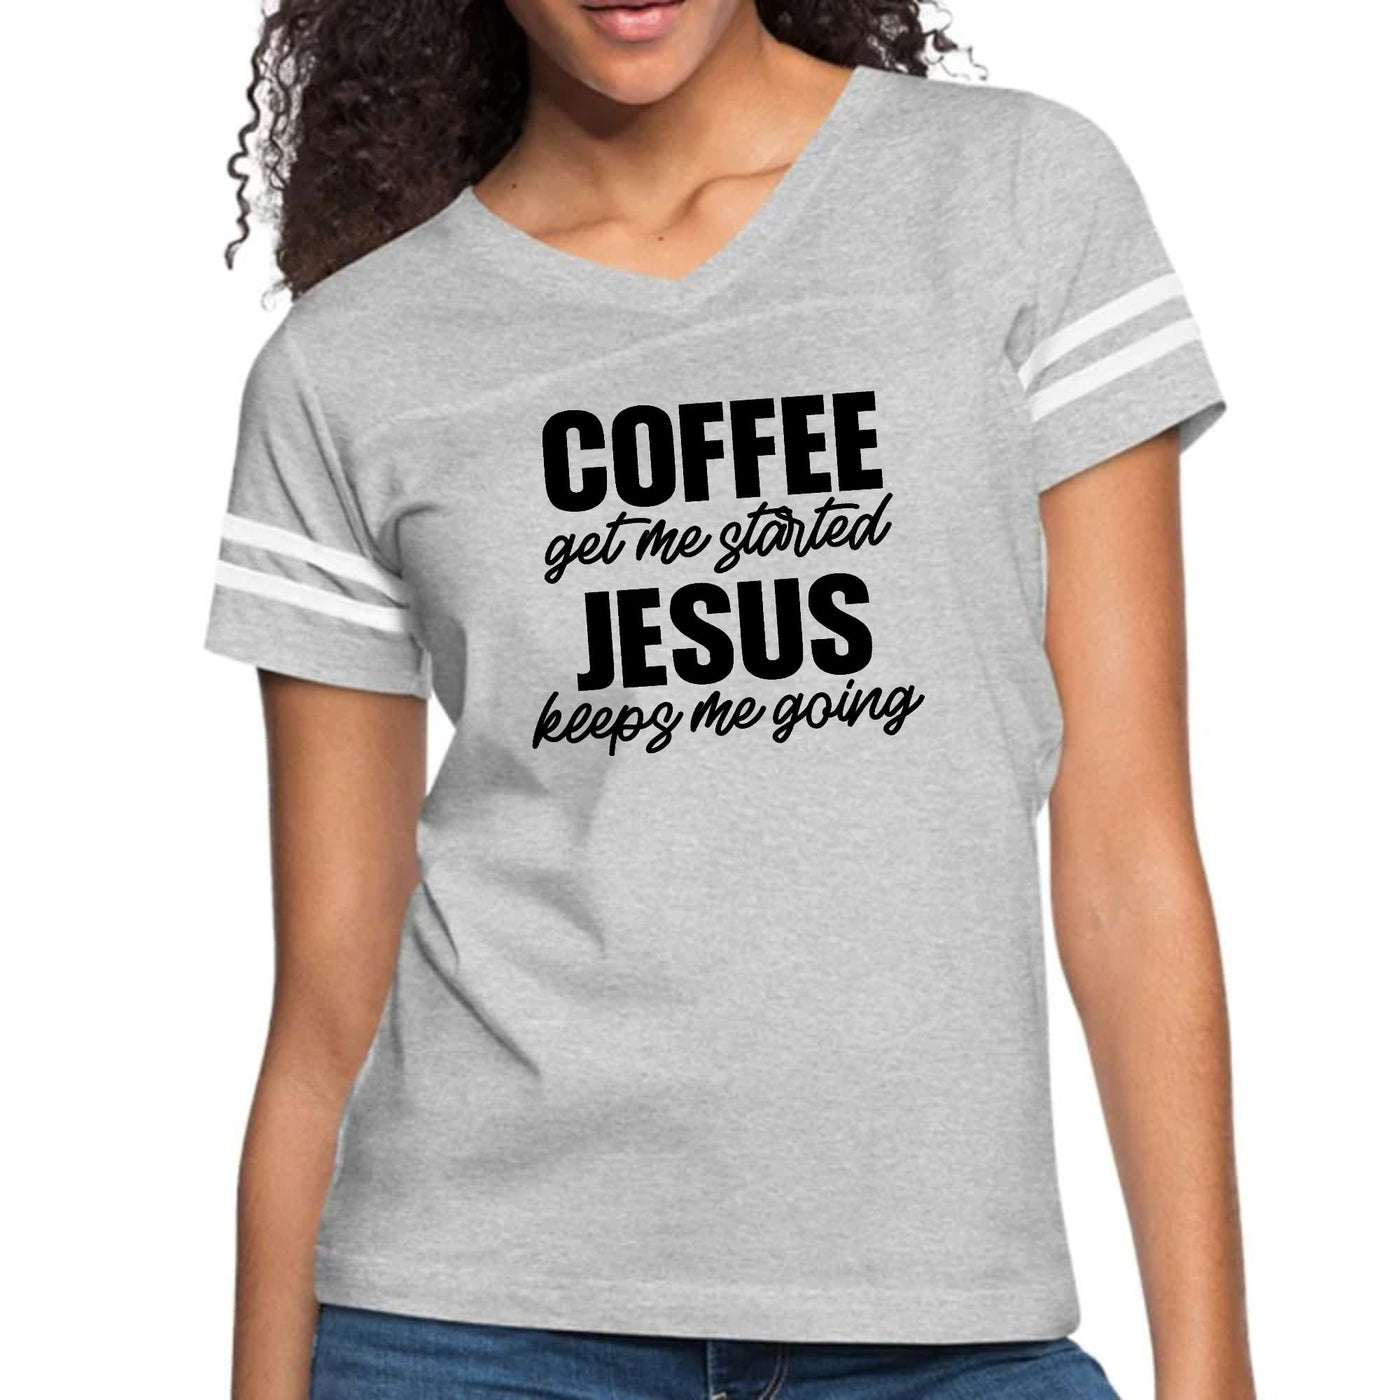 Womens Vintage Sport Graphic T-shirt Coffee Get Me Started Jesus - Womens